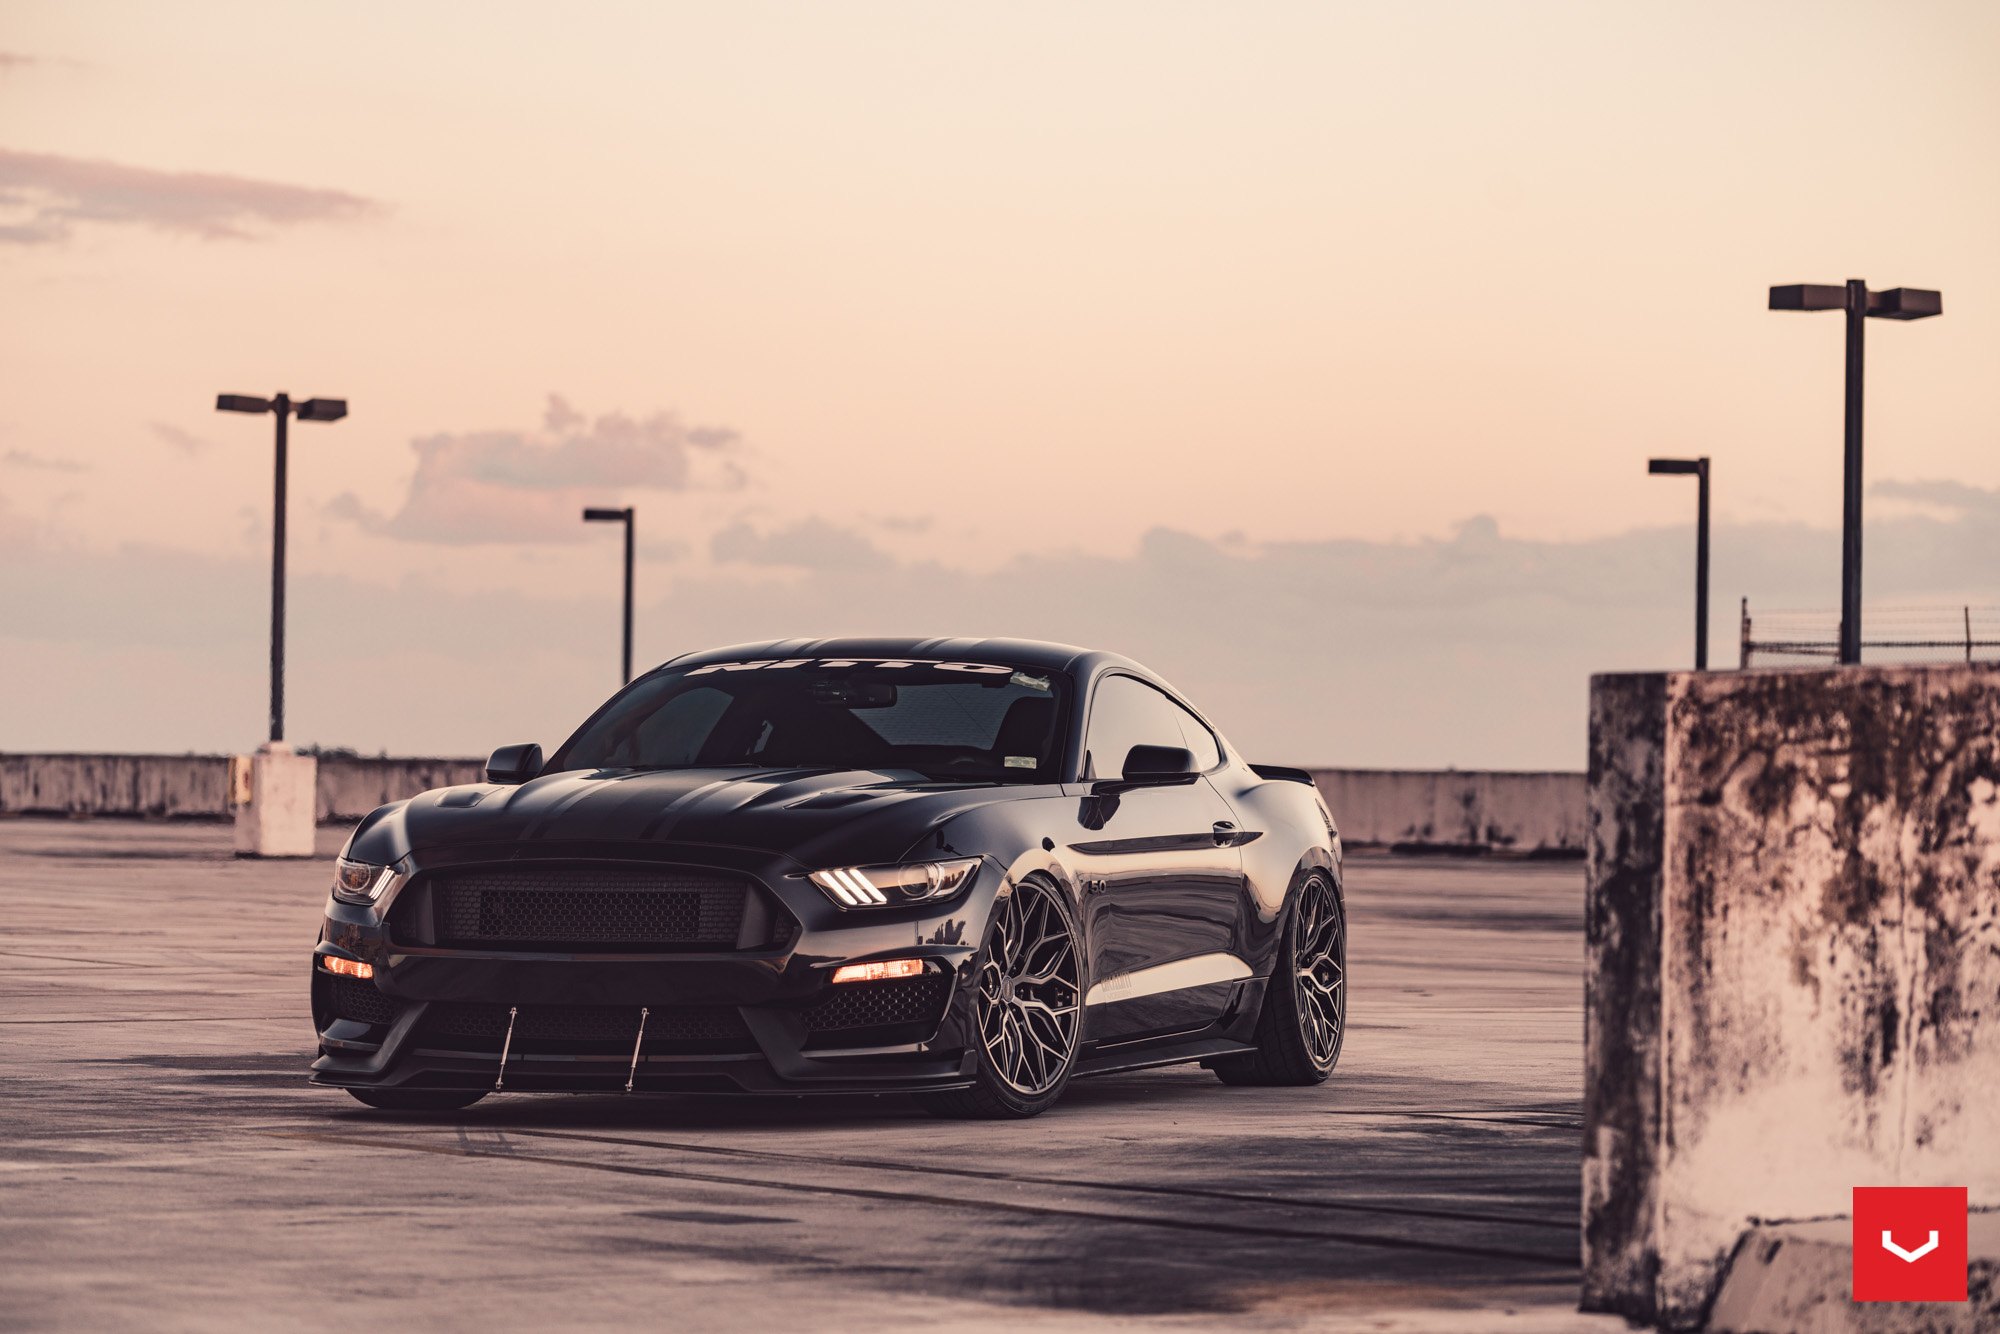 Custom Black Ford Mustang 5.0 on Nitto Tires - Photo by Vossen